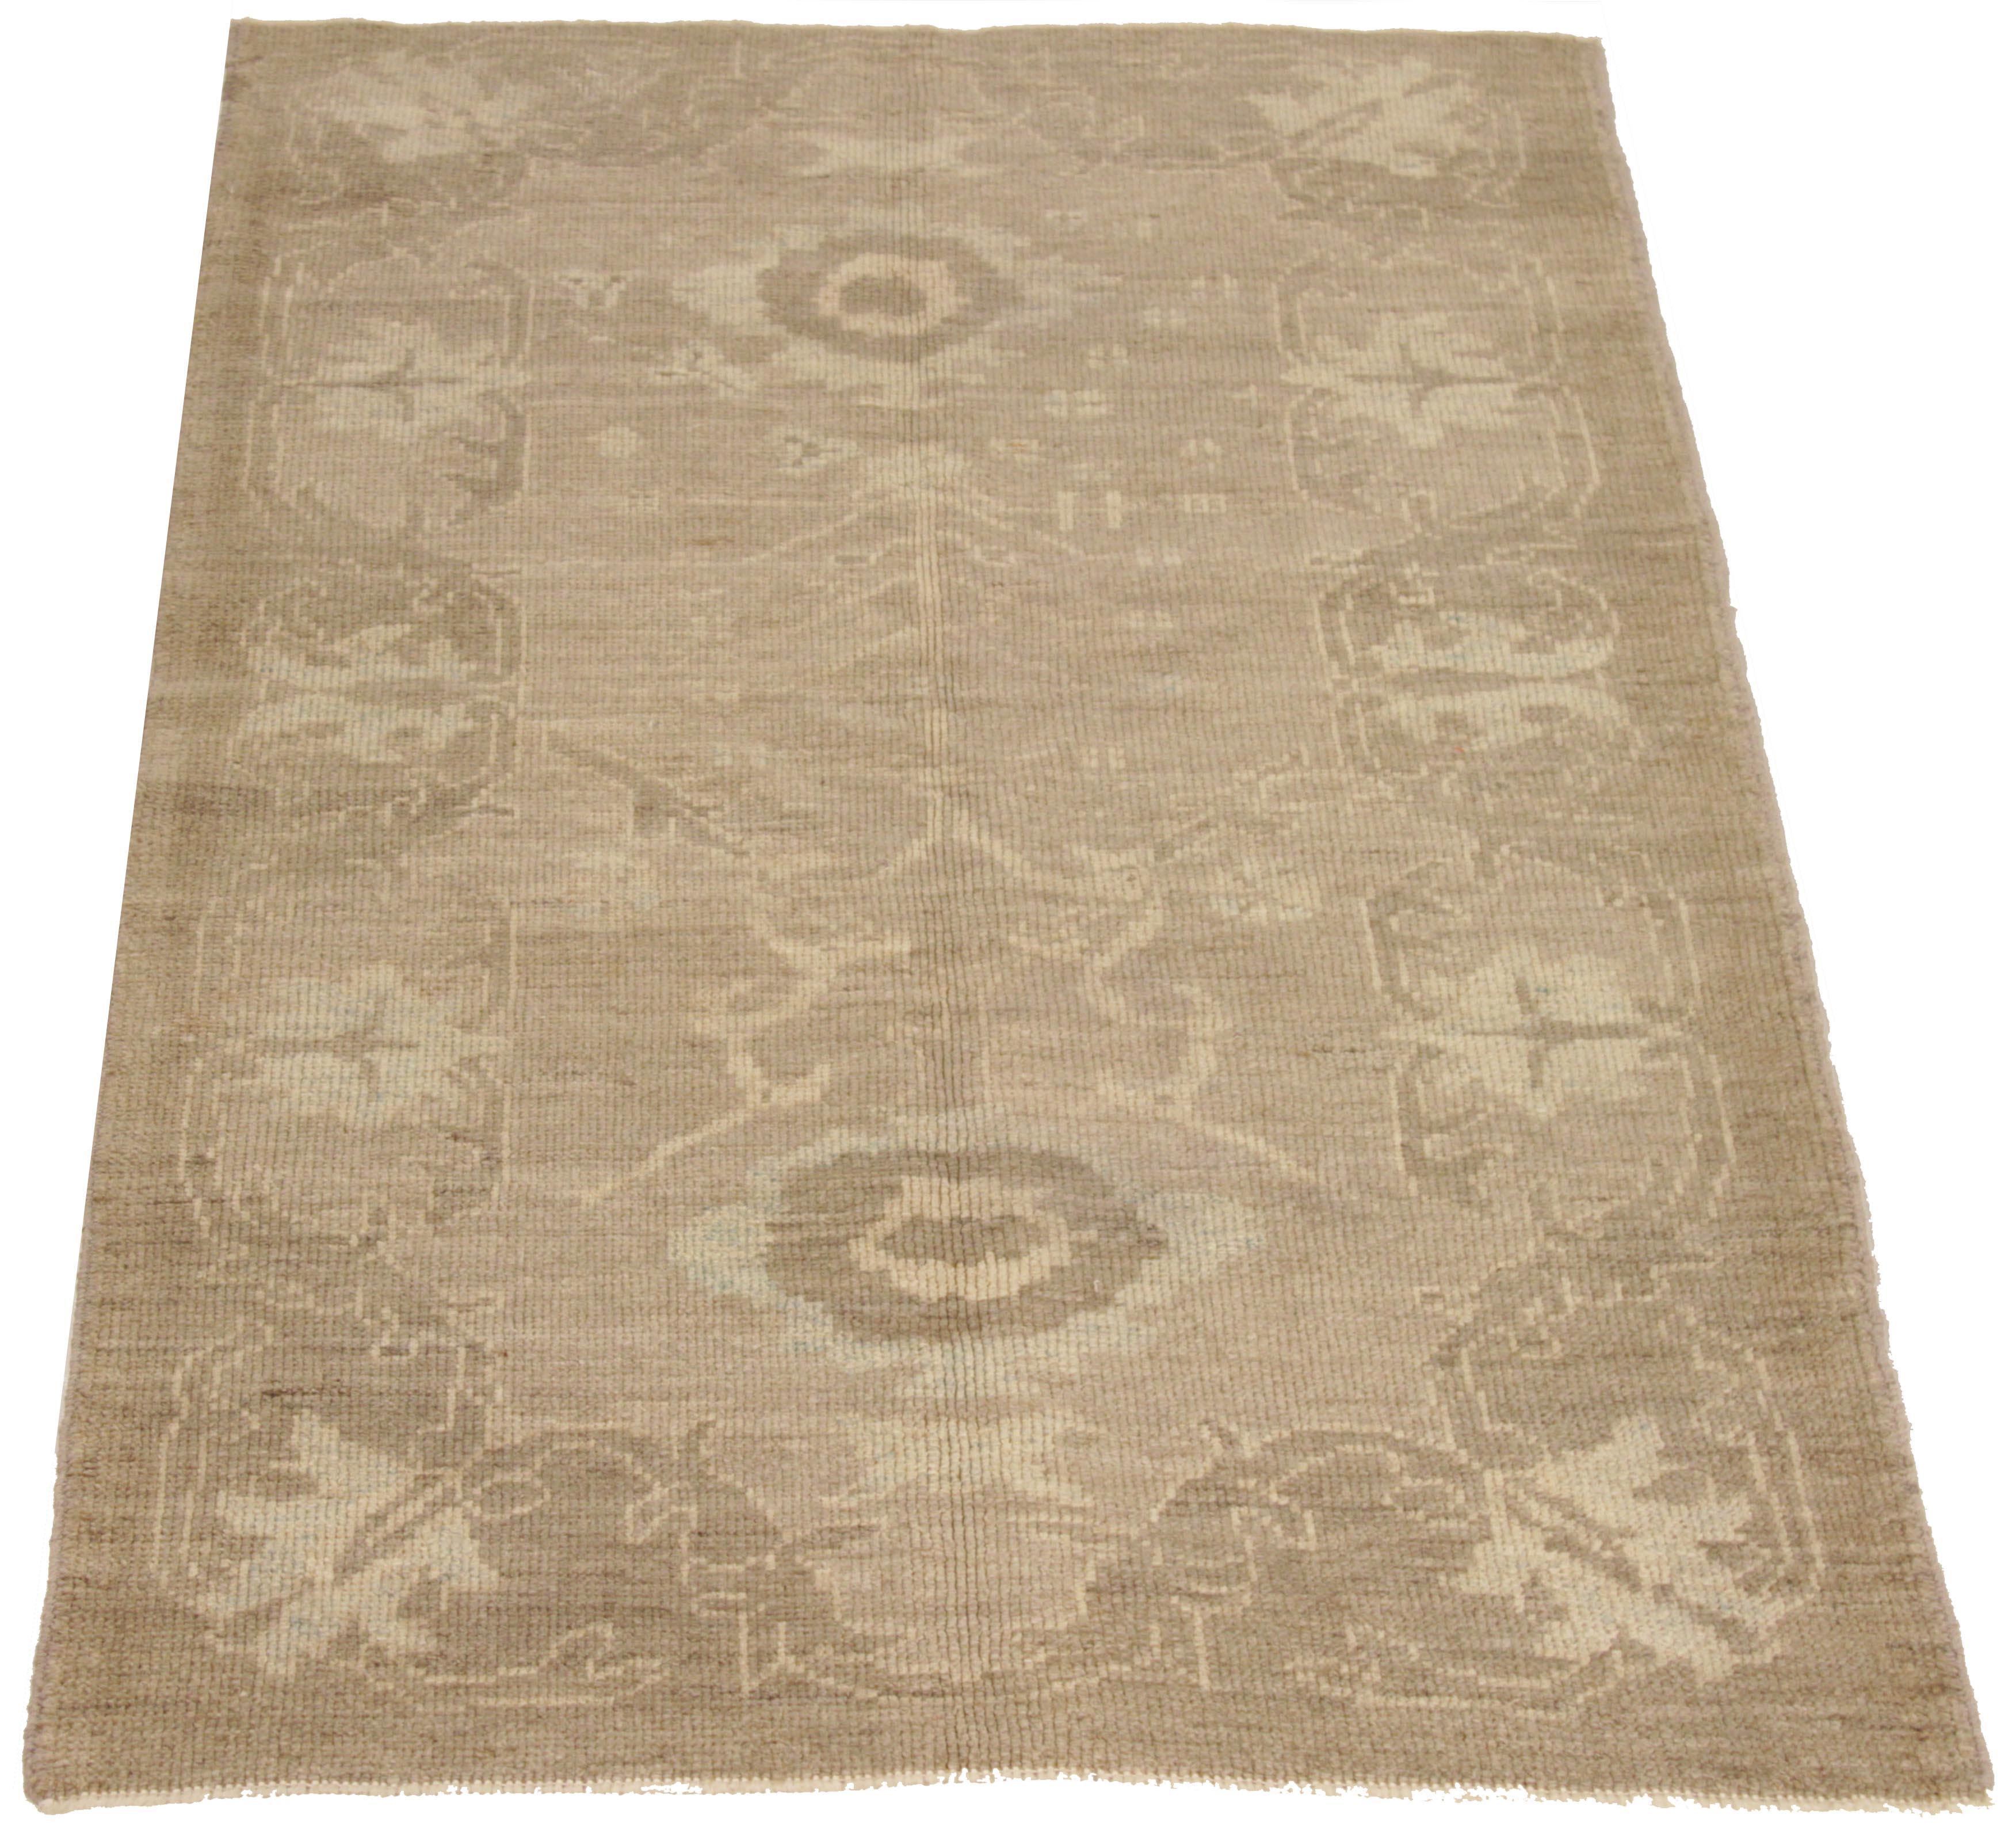 New Oushak Persian Rug with Blue and Brown Flower Medallions For Sale 2